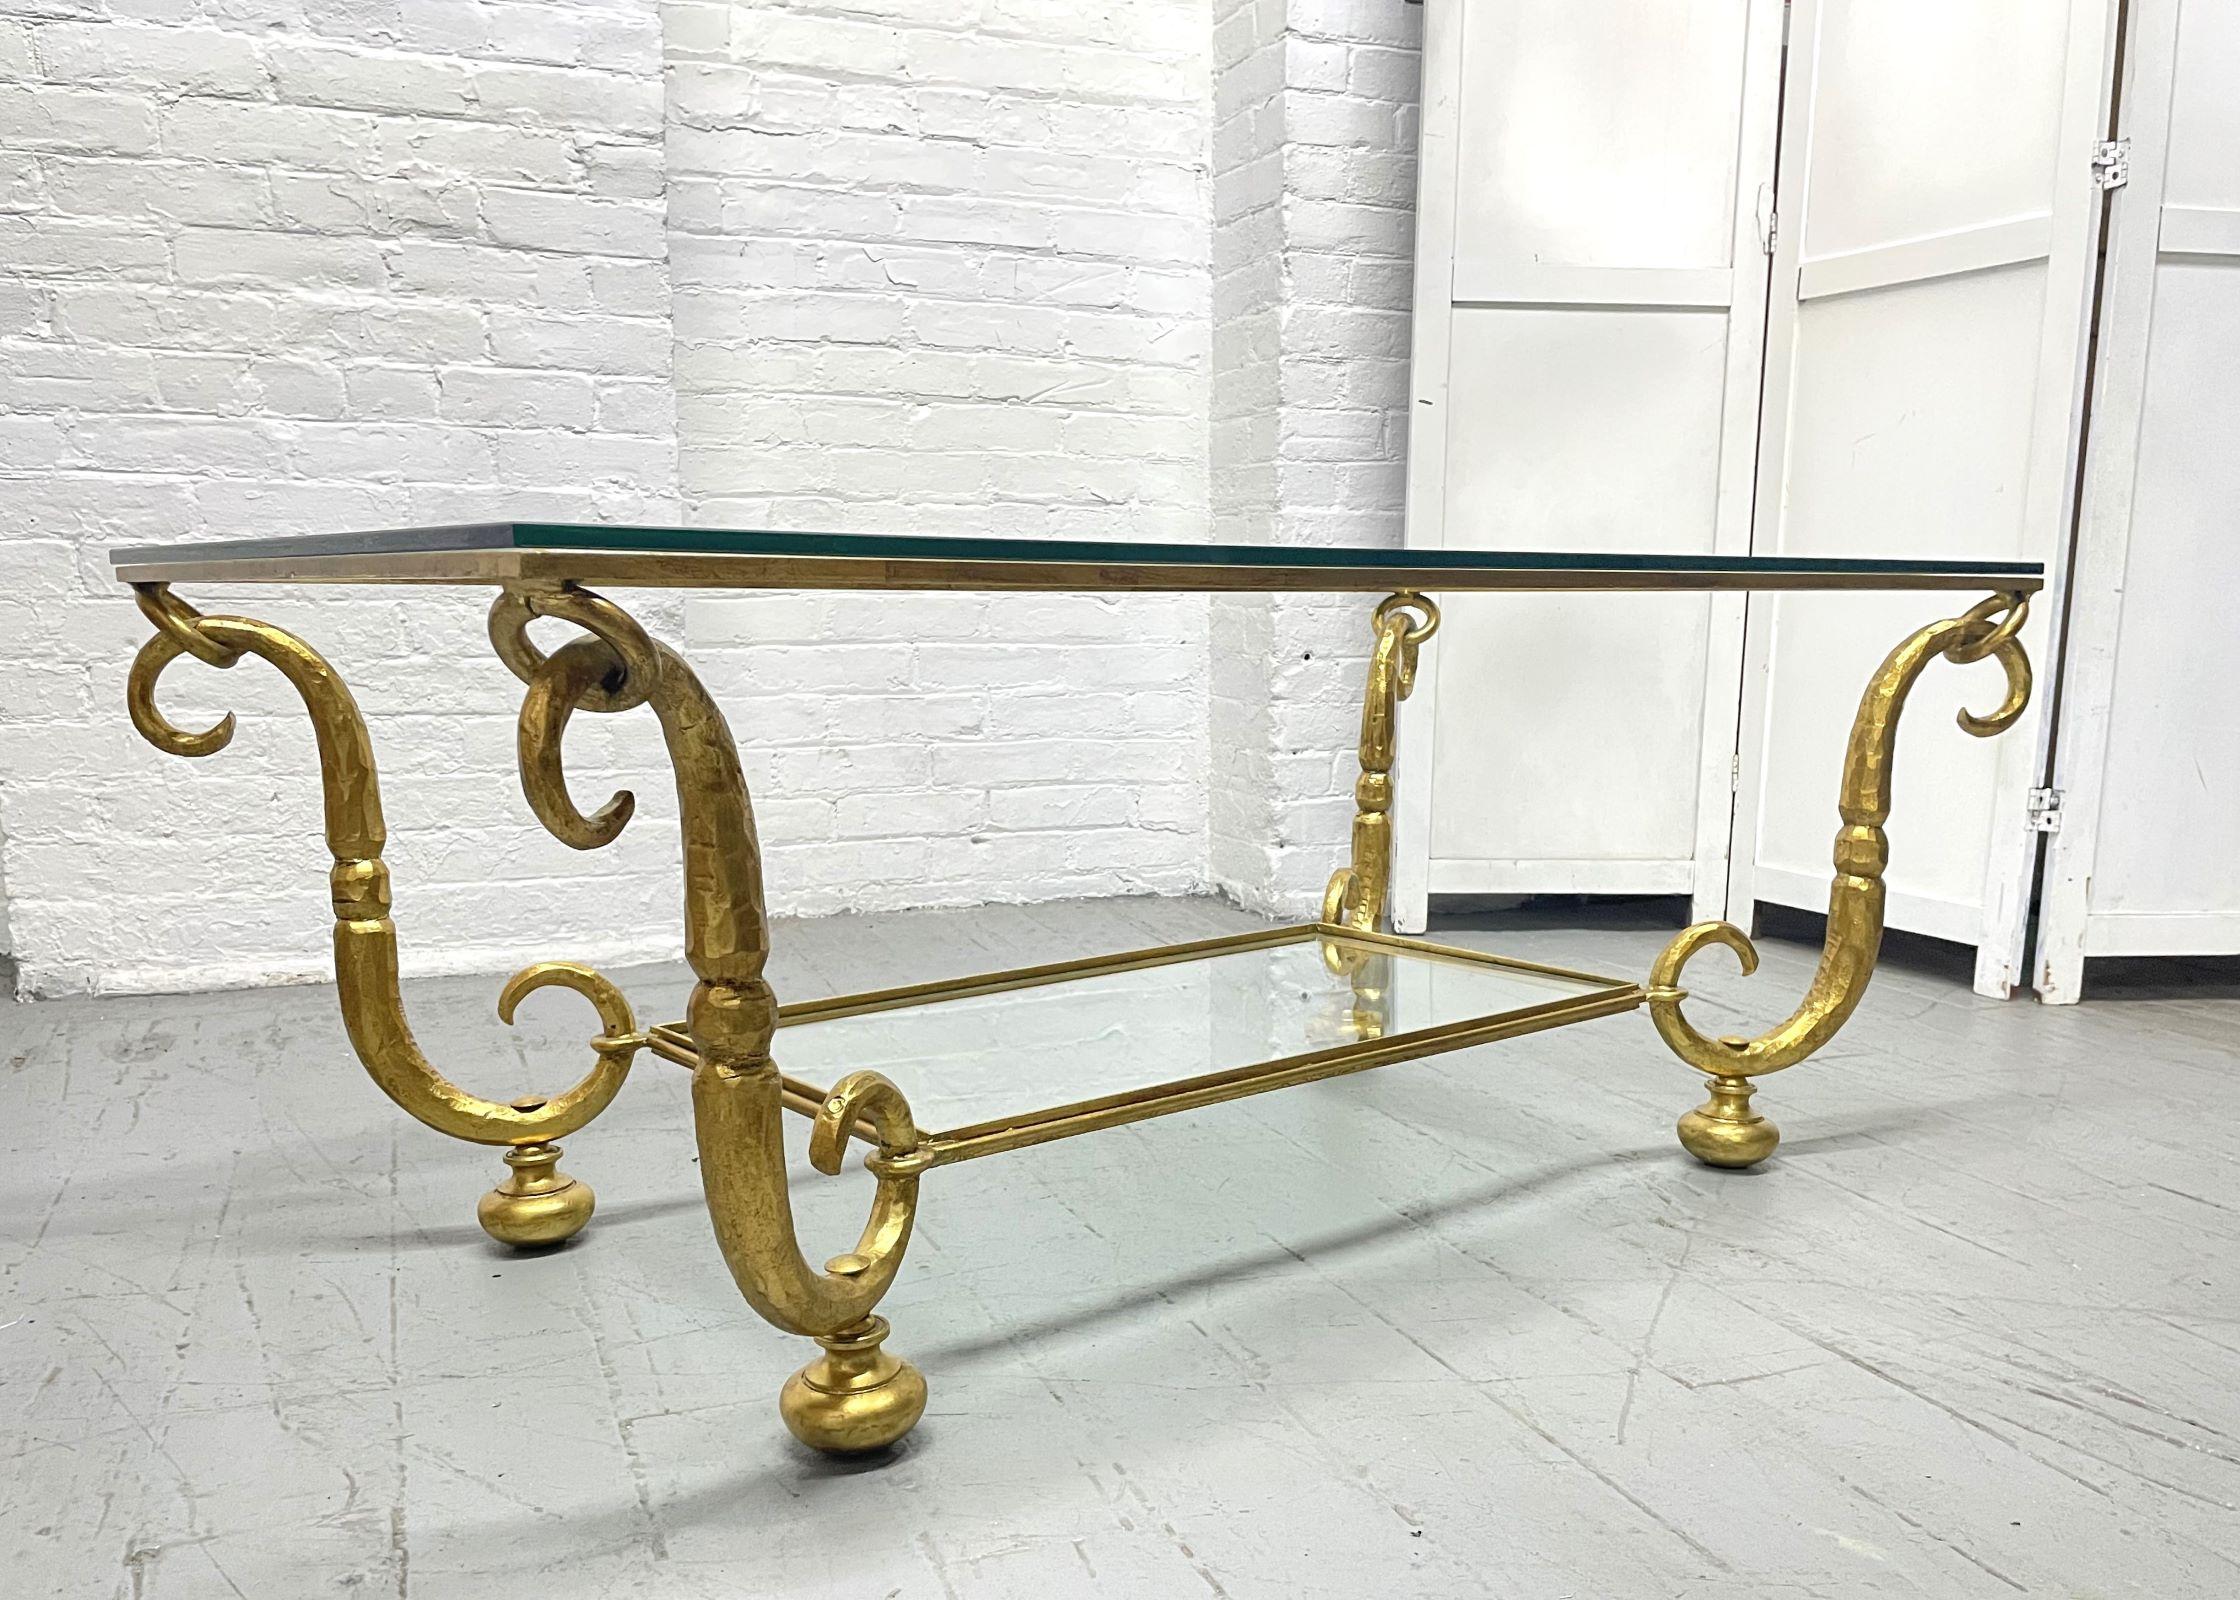 Gilt Wrought Iron and Glass Top Coffee Table.  The table has brass gilded feet, scroll pattern frame and the lower tier has a glass top as well.